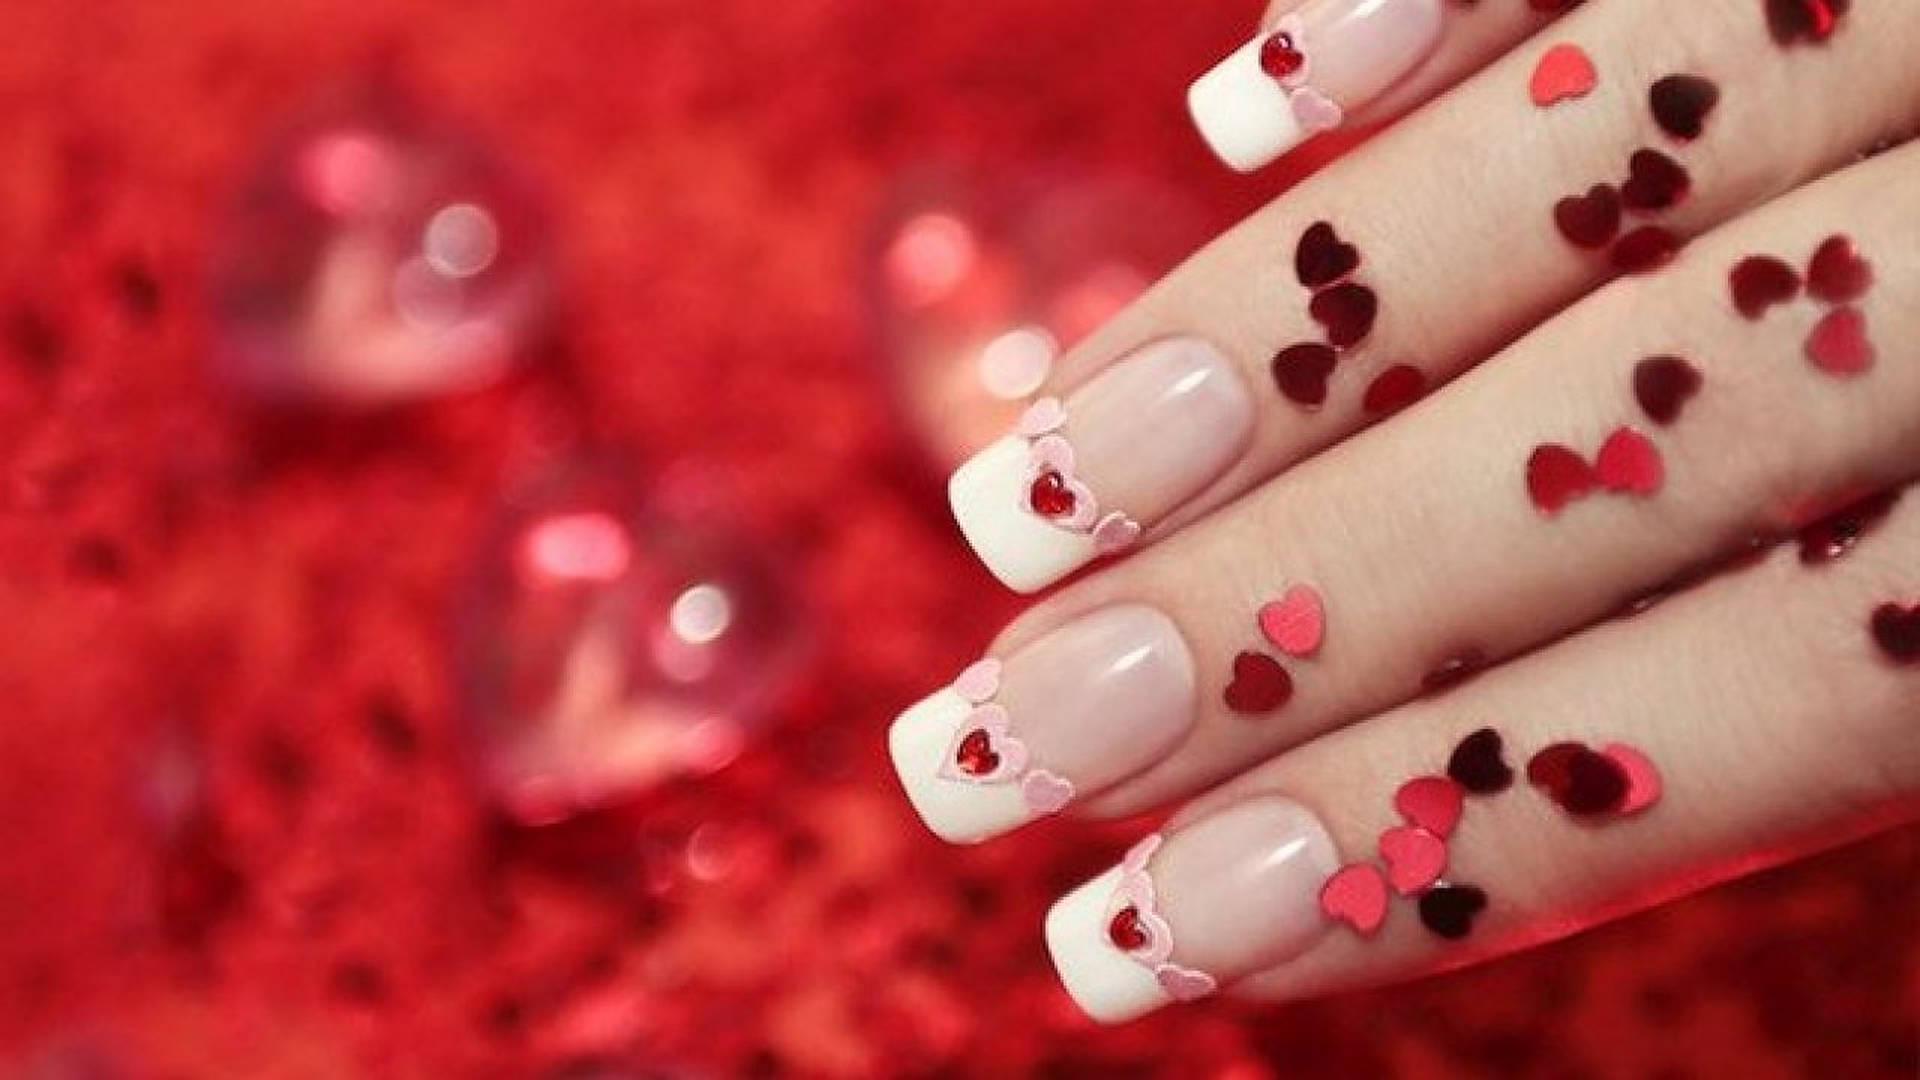 Passionate Red Heart Glittery Nails Background